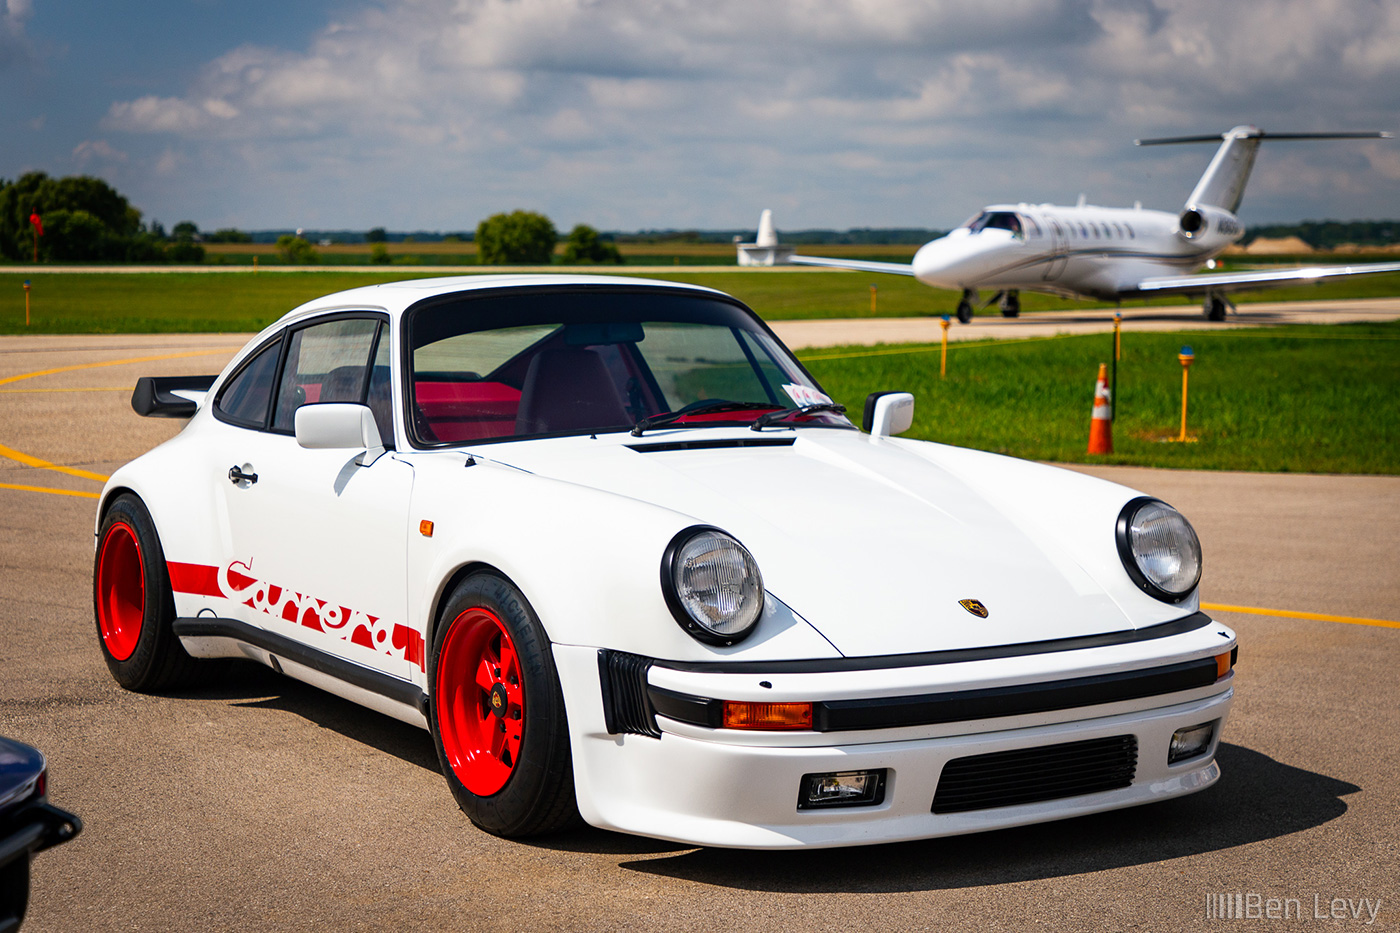 Custom Porsche 911 Turbo from Kelly-Moss Road and Race